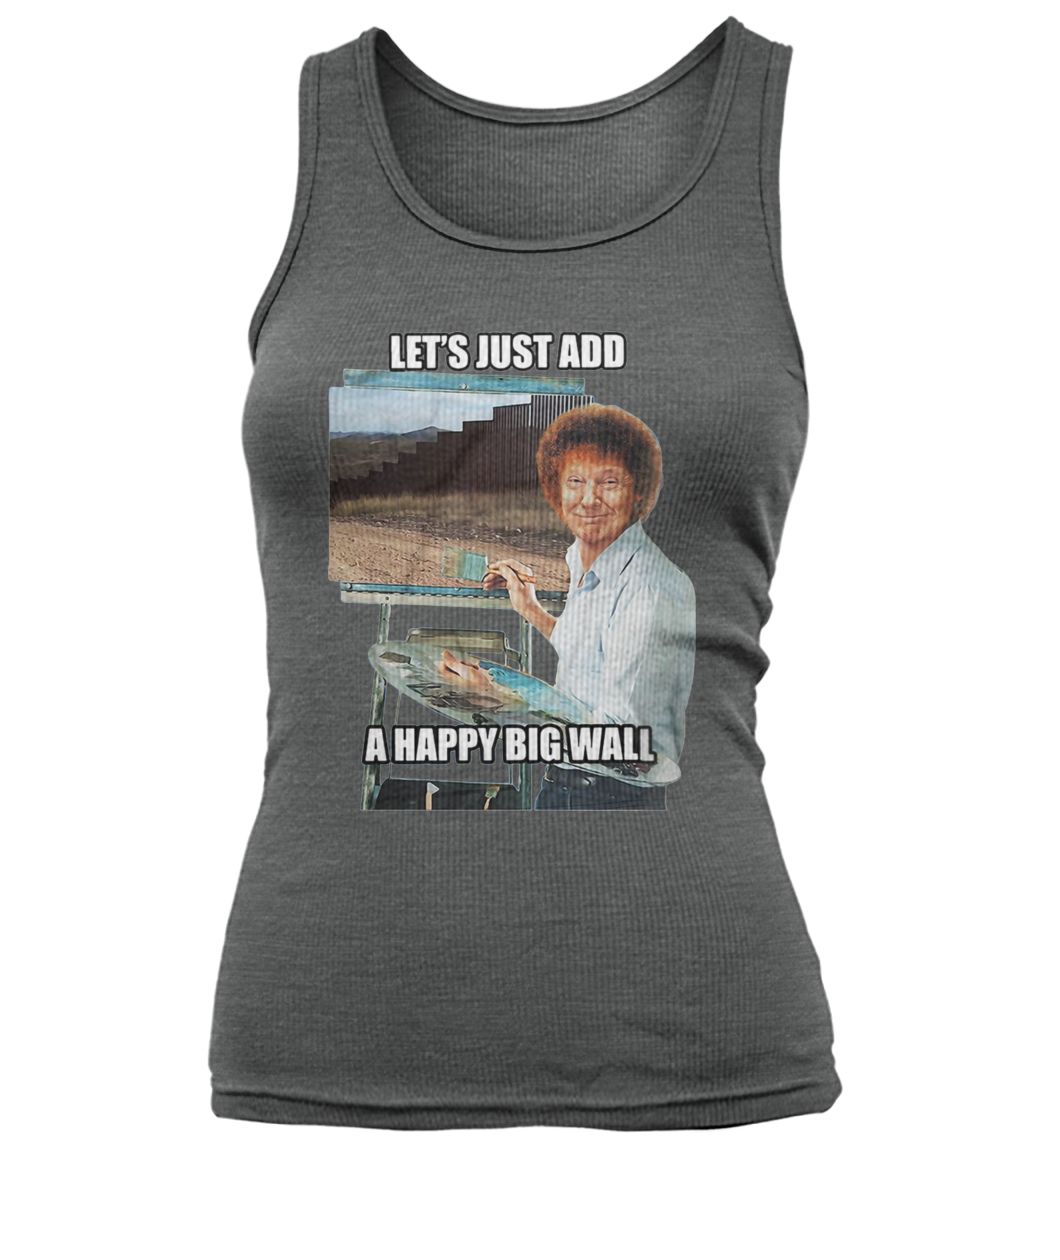 Trump the painter of the wall let's just add a happy big wall women's tank top